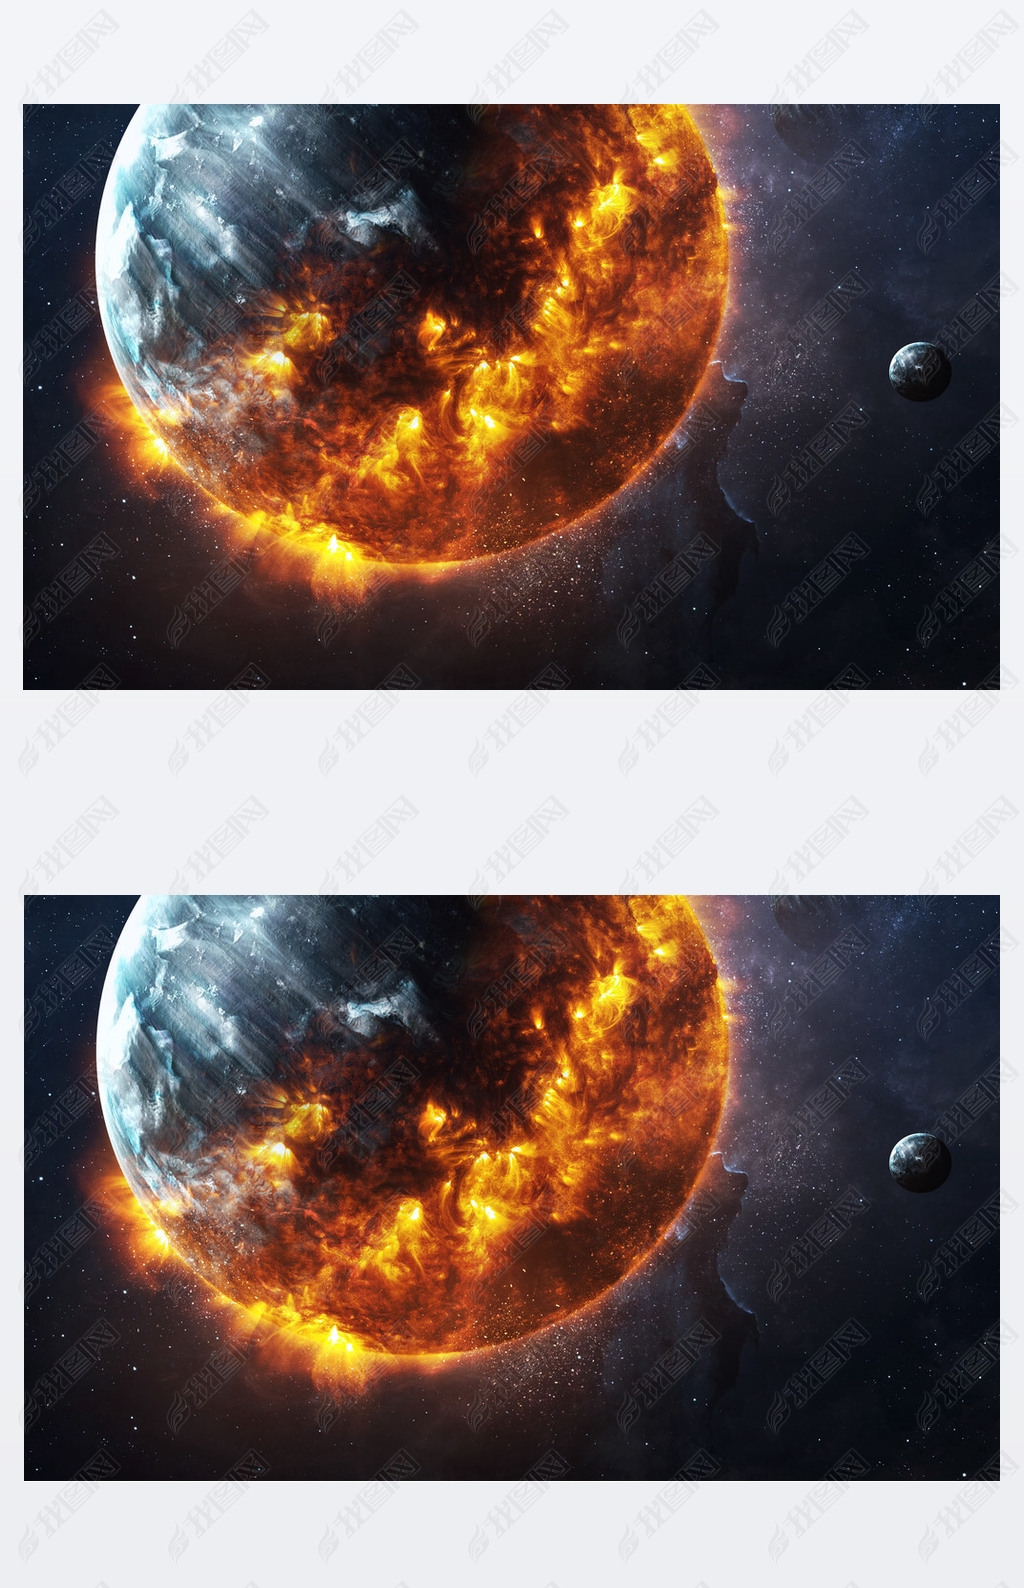 Abstract apocalyptic background - burning and exploding planet . This image elements furnished by NA